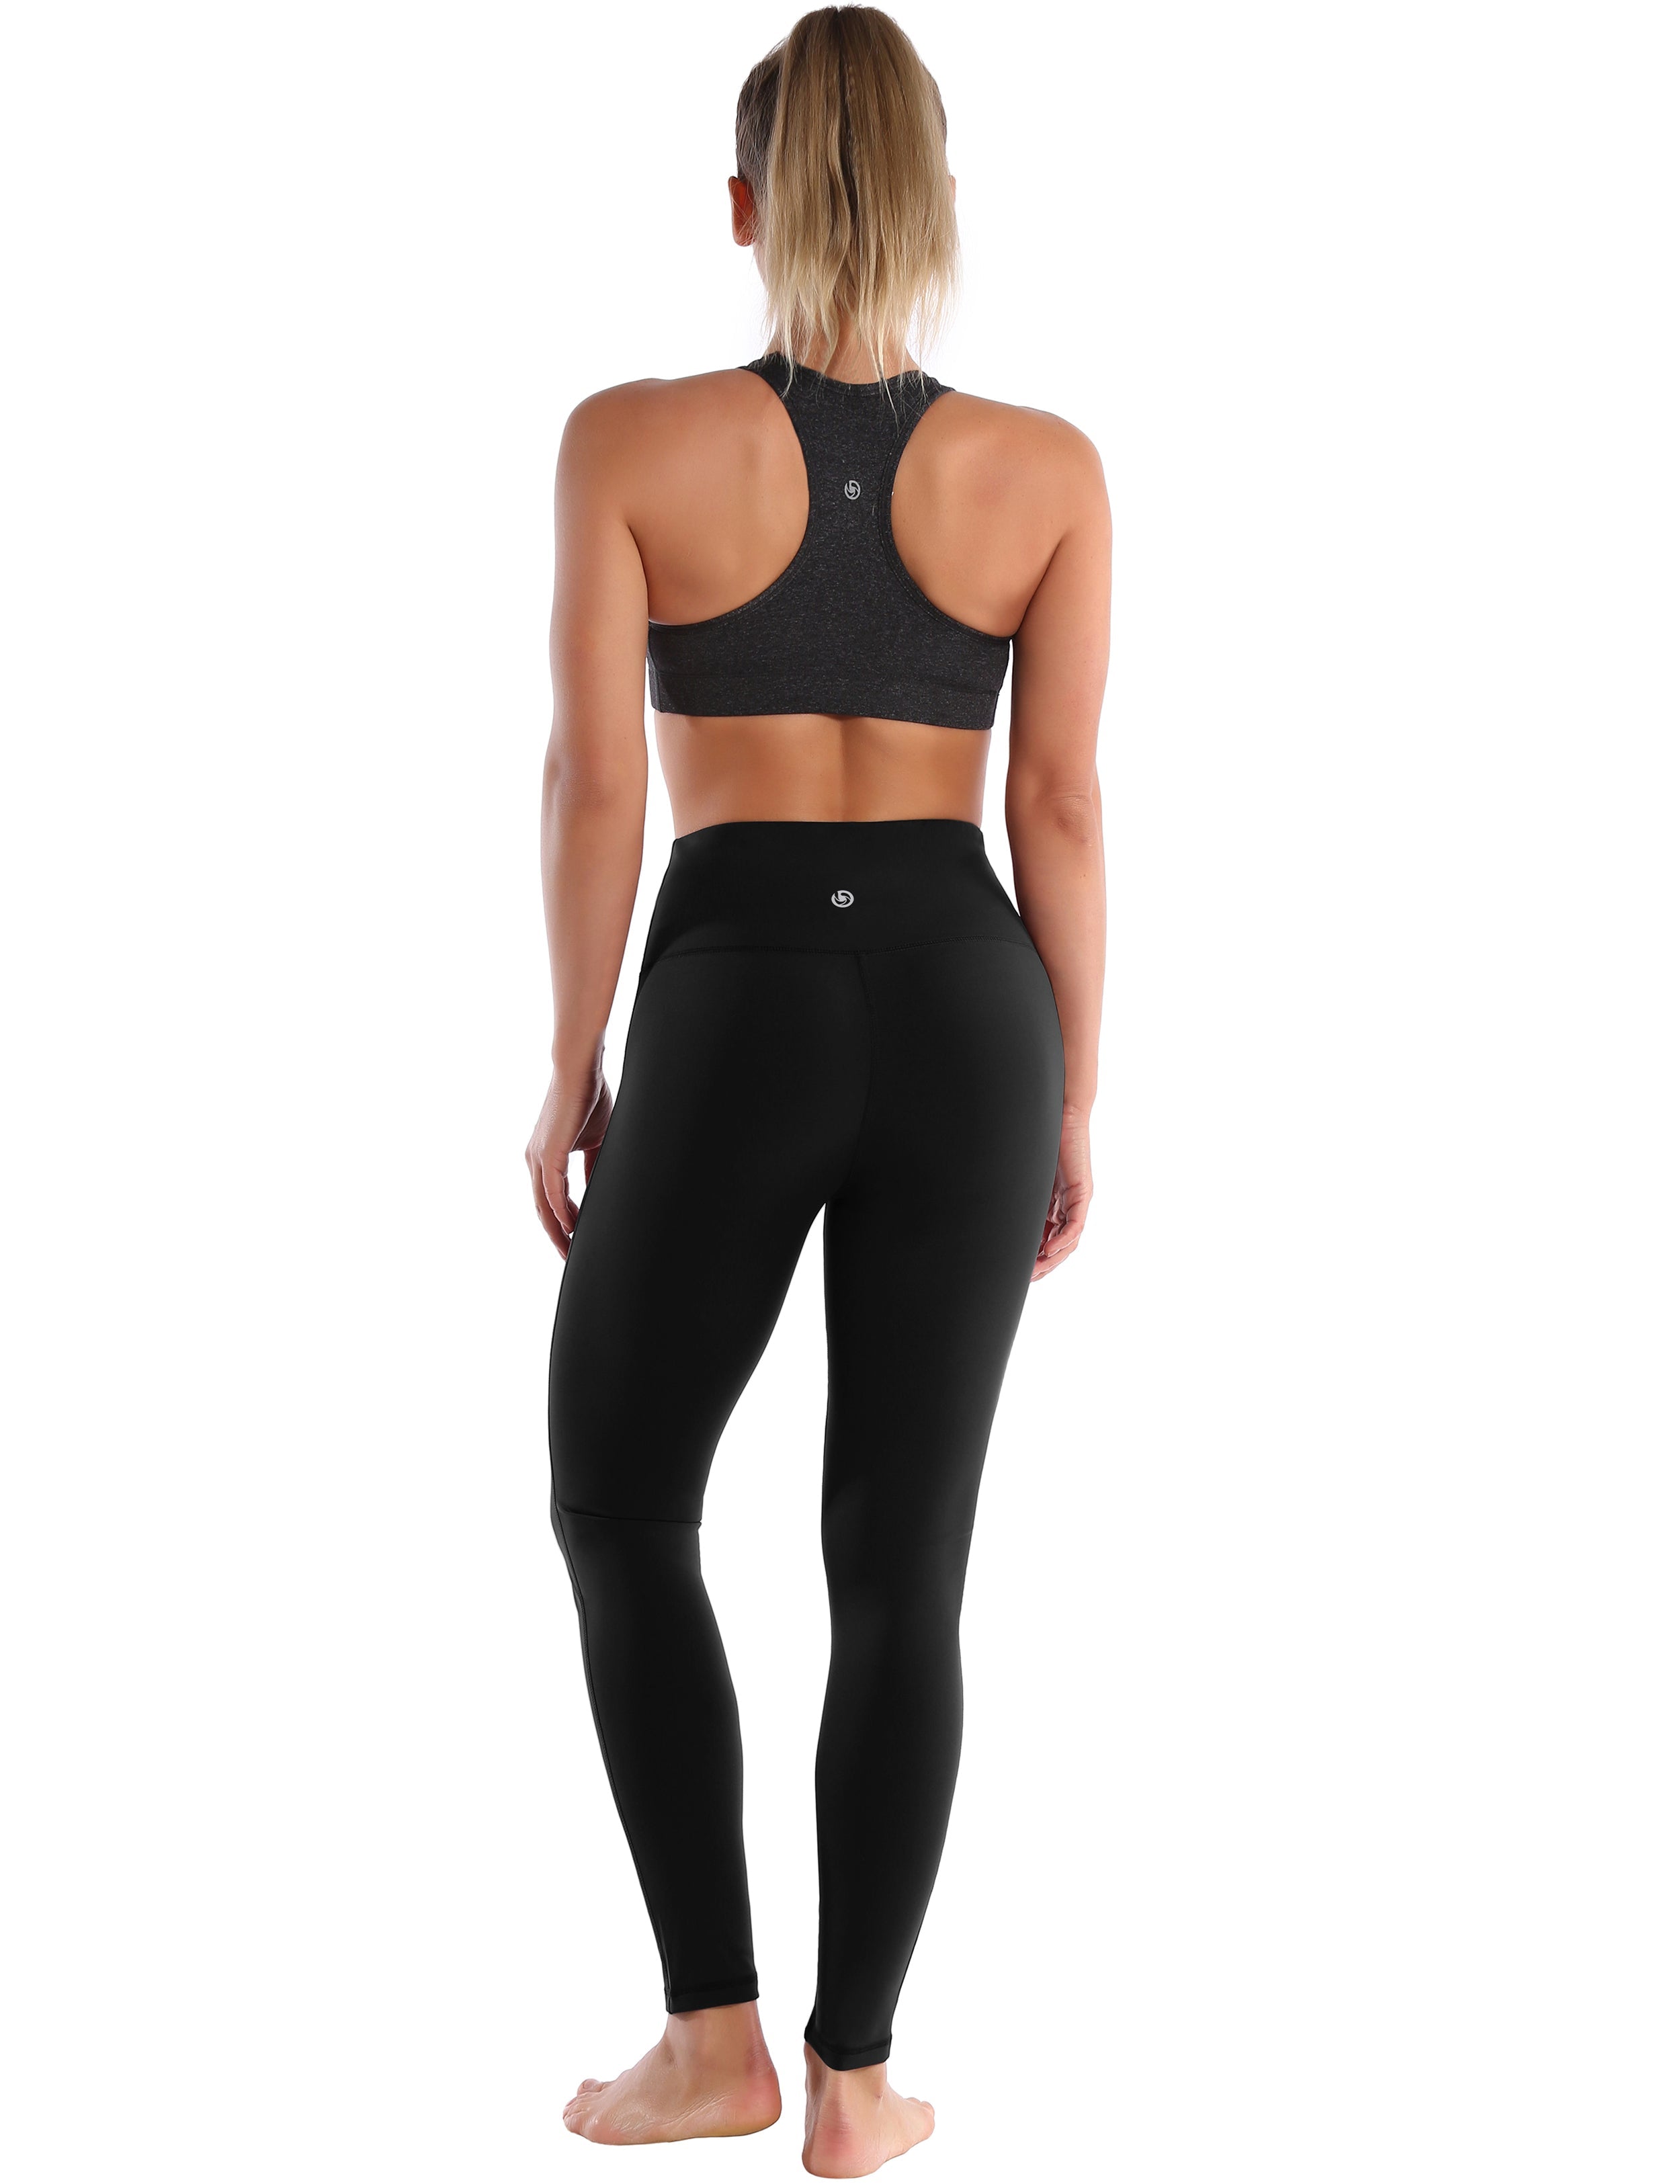 High Waist Side Line Biking Pants black Side Line is Make Your Legs Look Longer and Thinner 75%Nylon/25%Spandex Fabric doesn't attract lint easily 4-way stretch No see-through Moisture-wicking Tummy control Inner pocket Two lengths